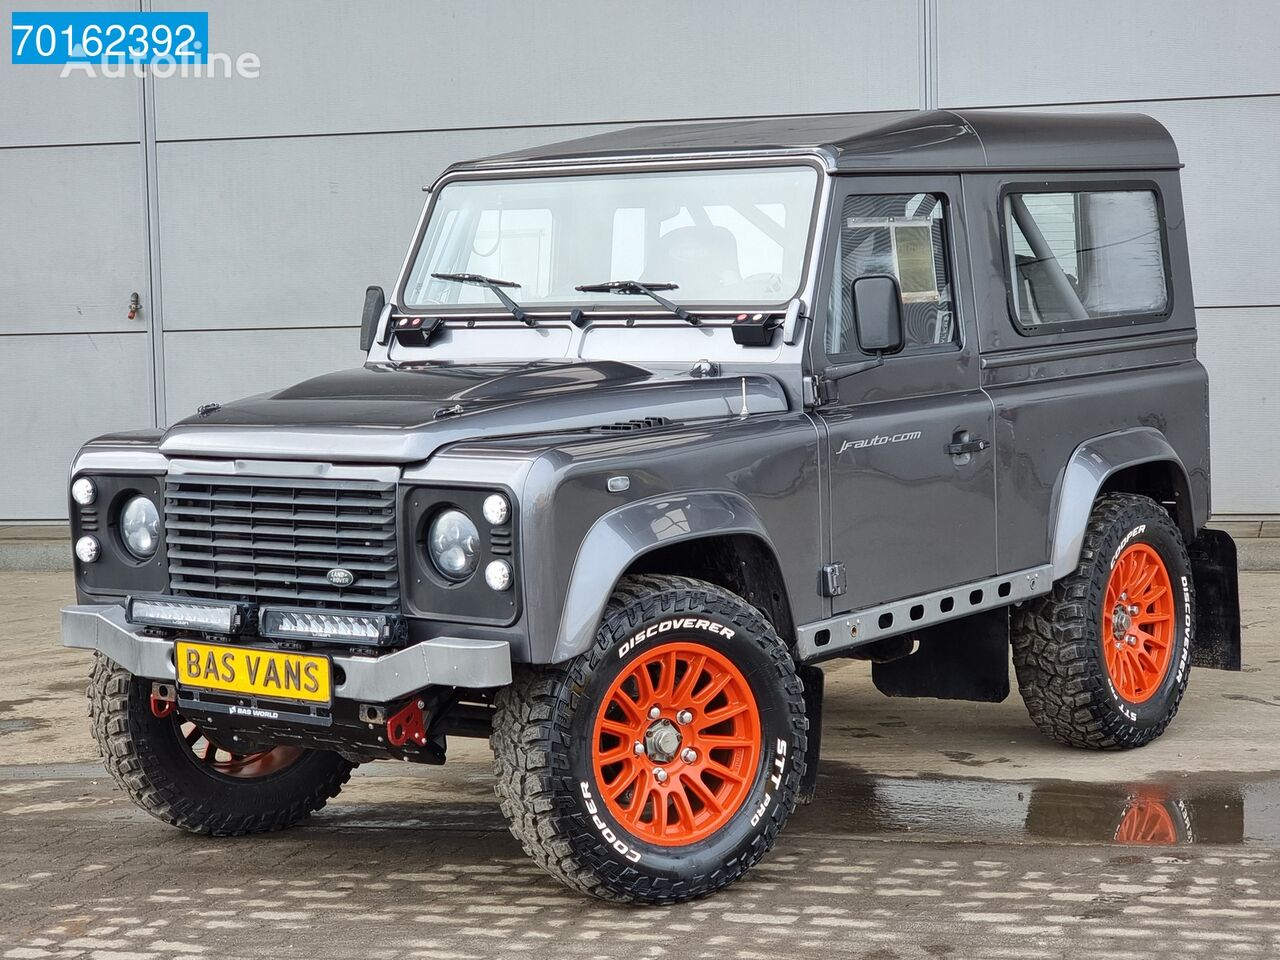 SUV Land Rover Defender 2.2 Bowler Rally Intrax suspension Roll Cage Rolkooi 4x